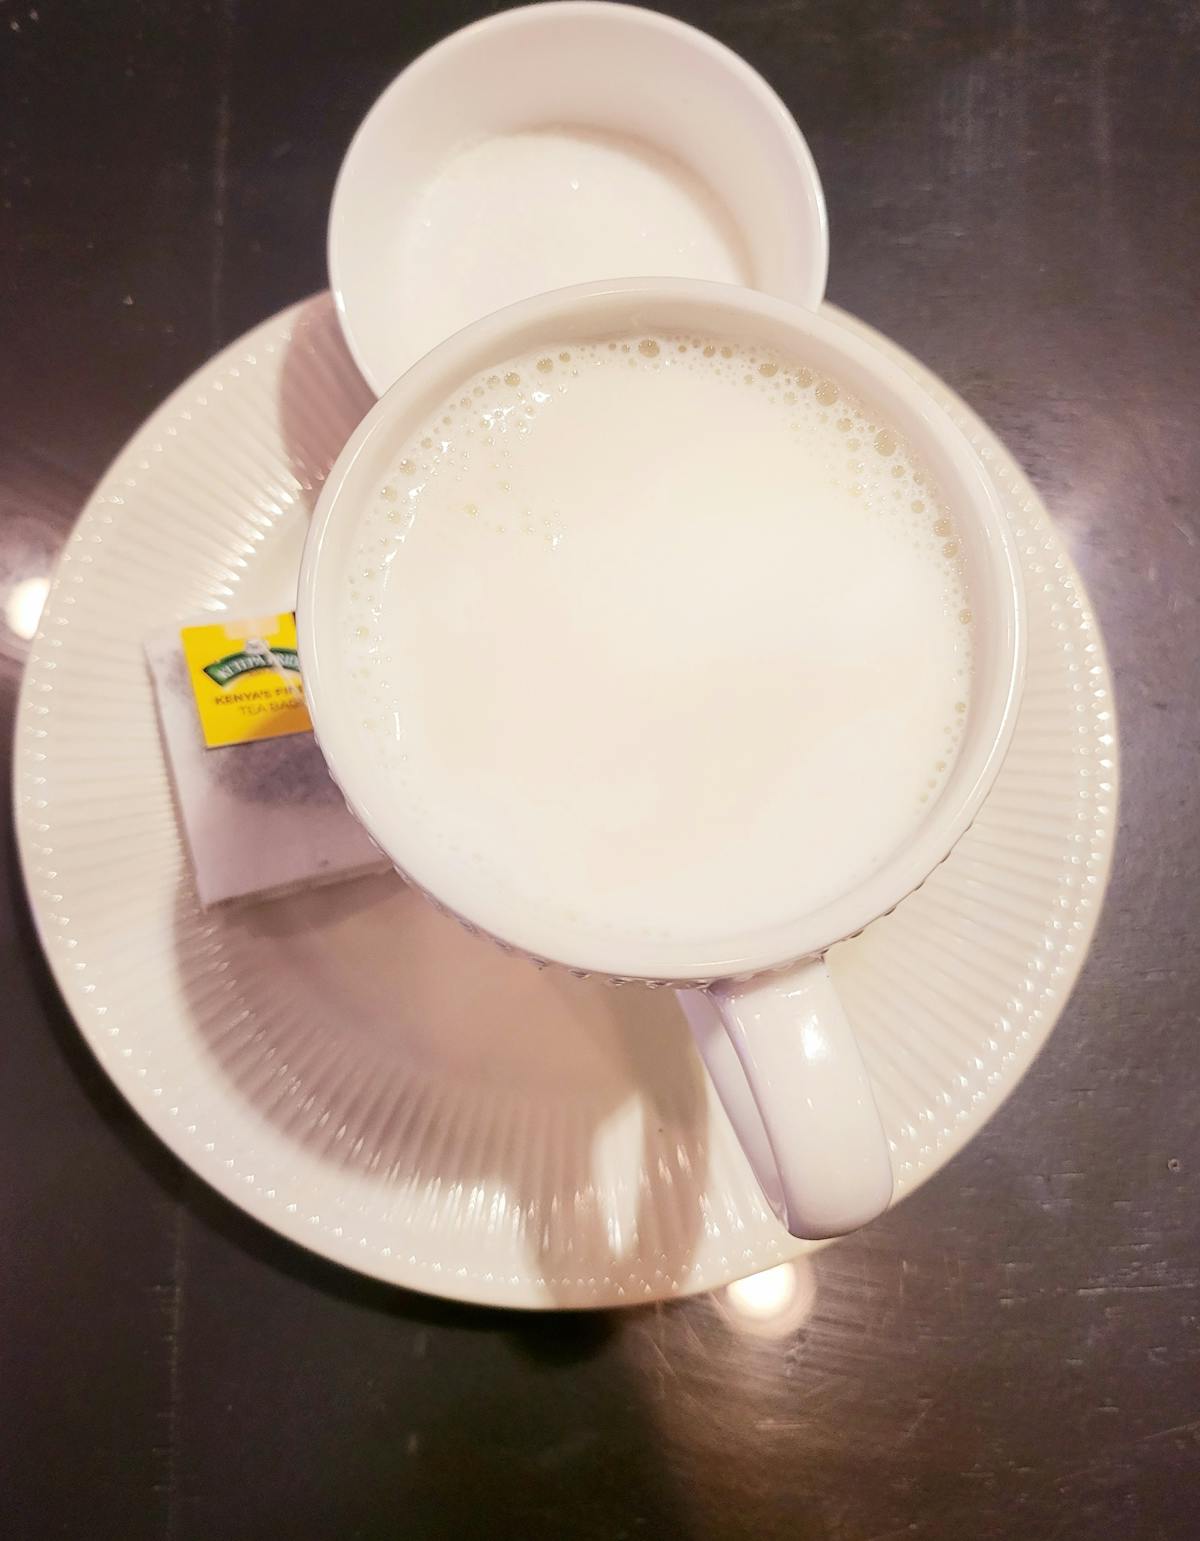 a cup of coffee on a table